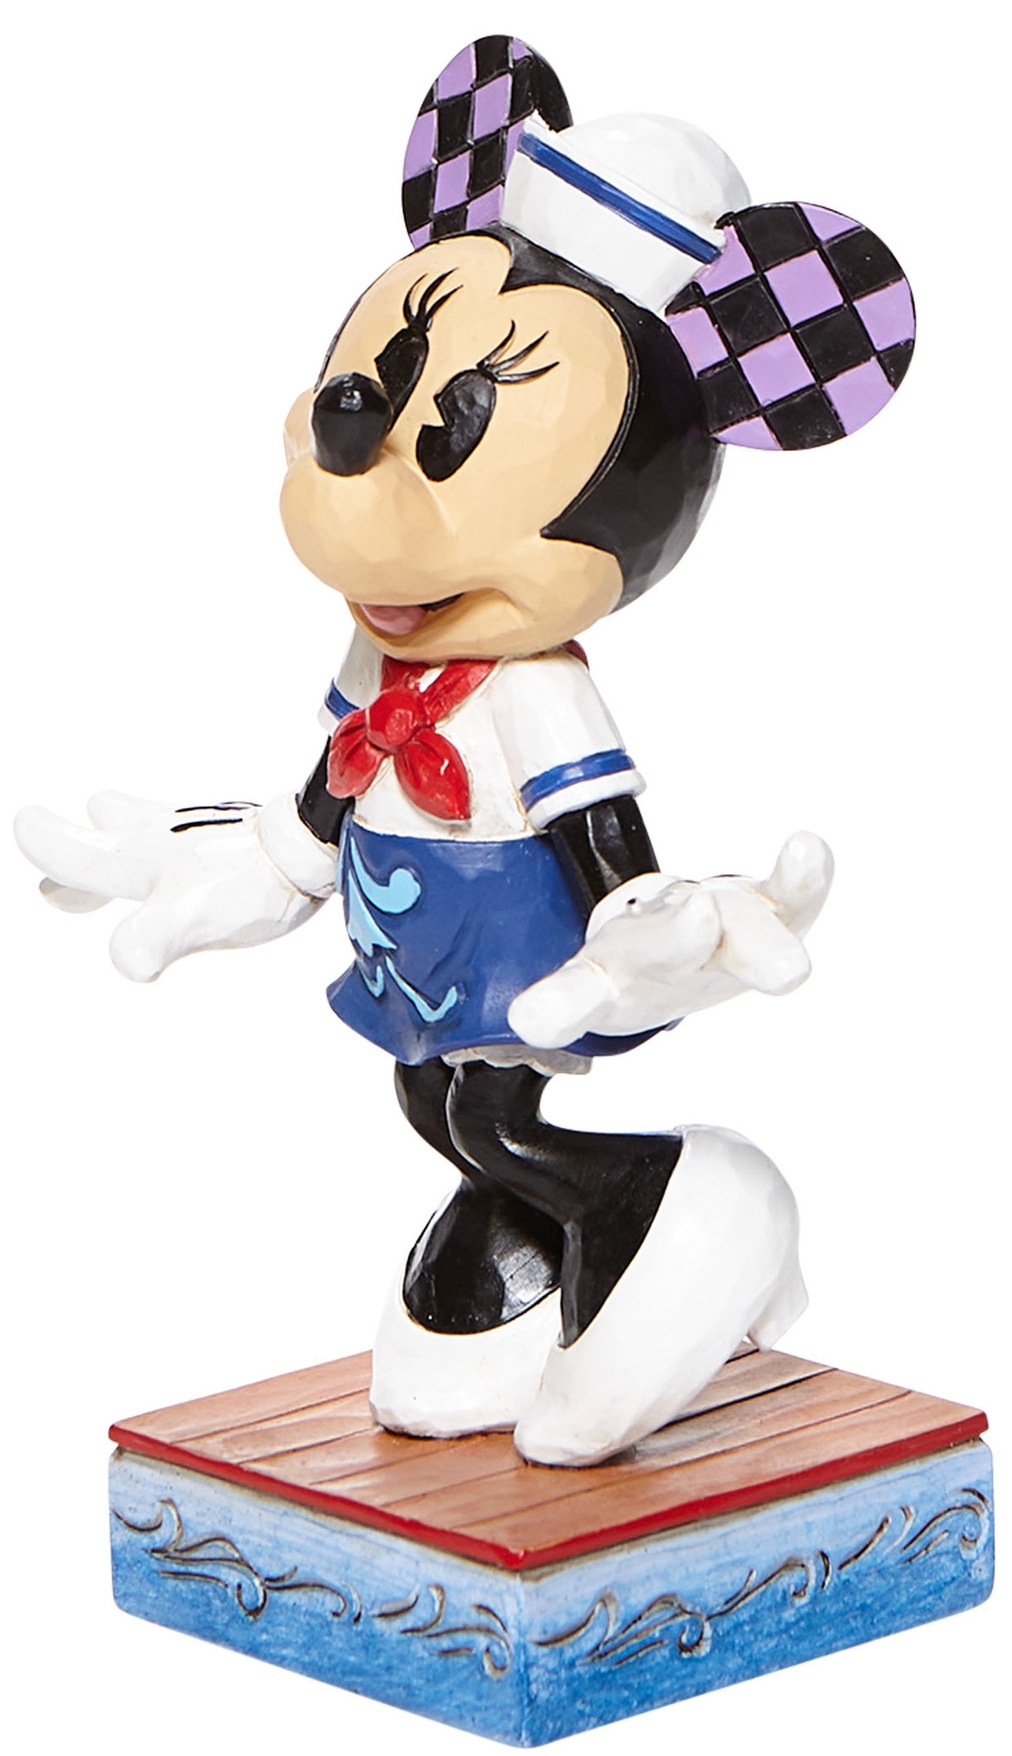 Disney Traditions by Jim Shore 6008080 Minnie Sailor Personality Figurine